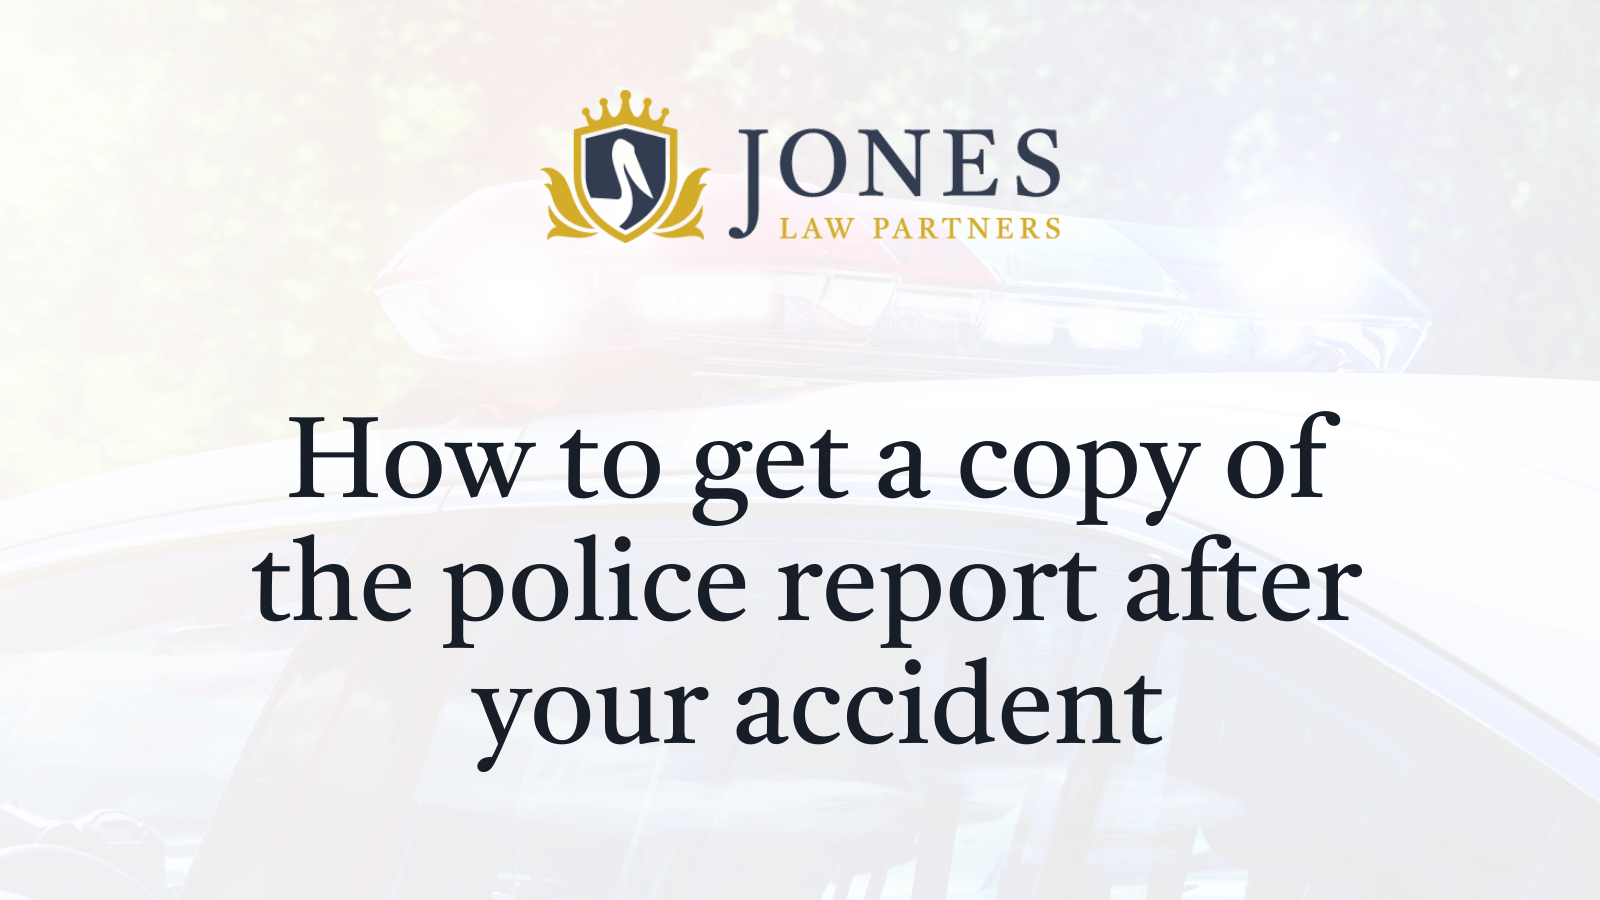 How to get a copy of the police report after your accident - Jones Law Partners